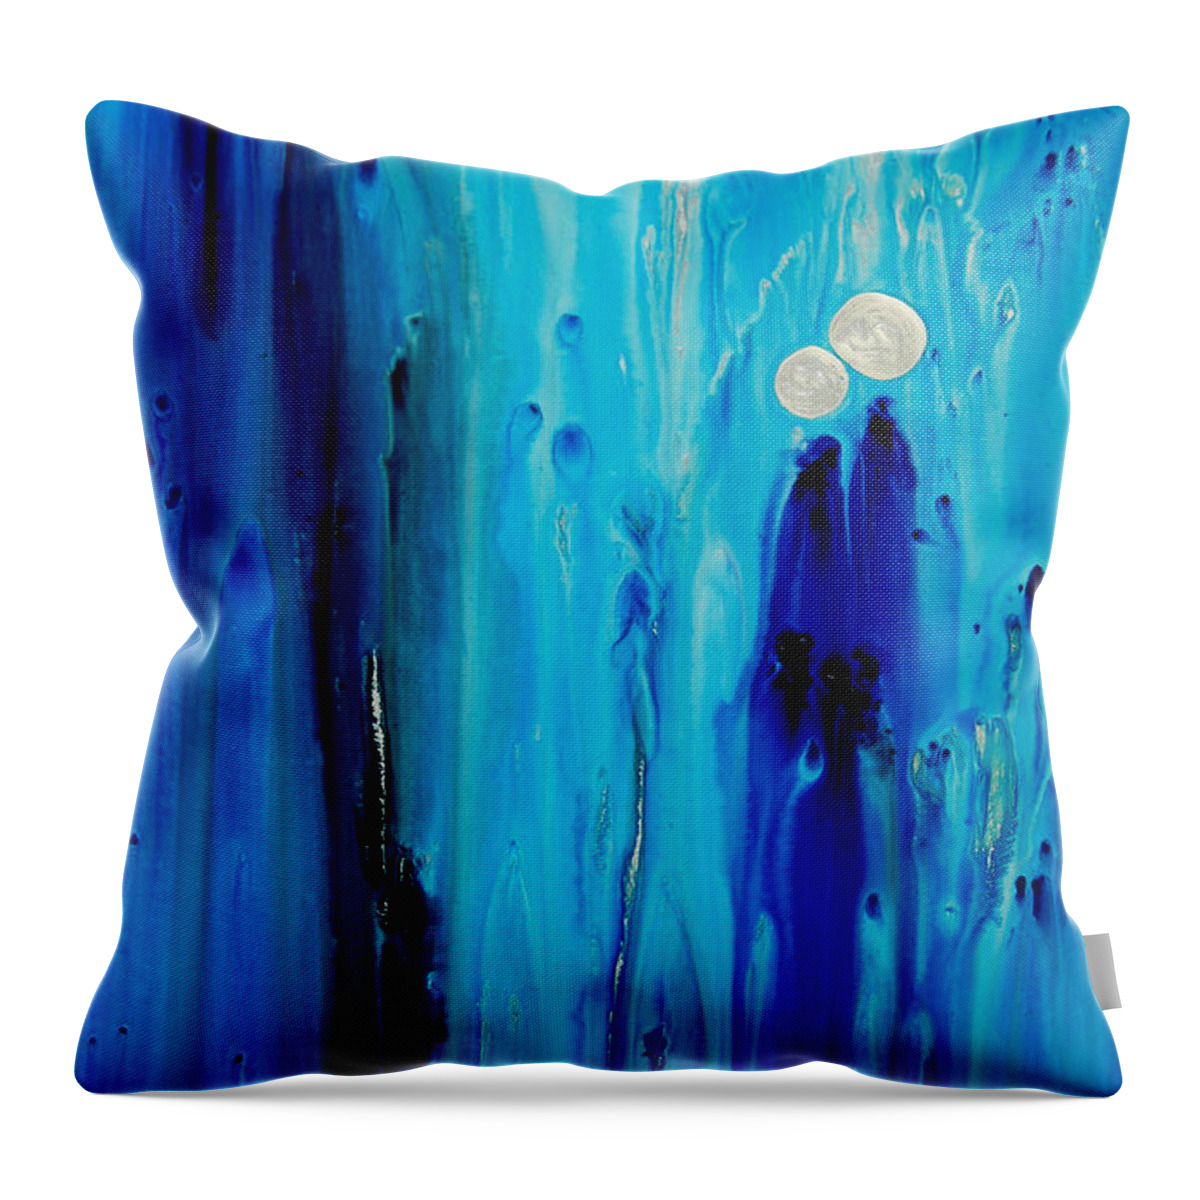 Blue Throw Pillow featuring the painting Never Alone By Sharon Cummings by Sharon Cummings